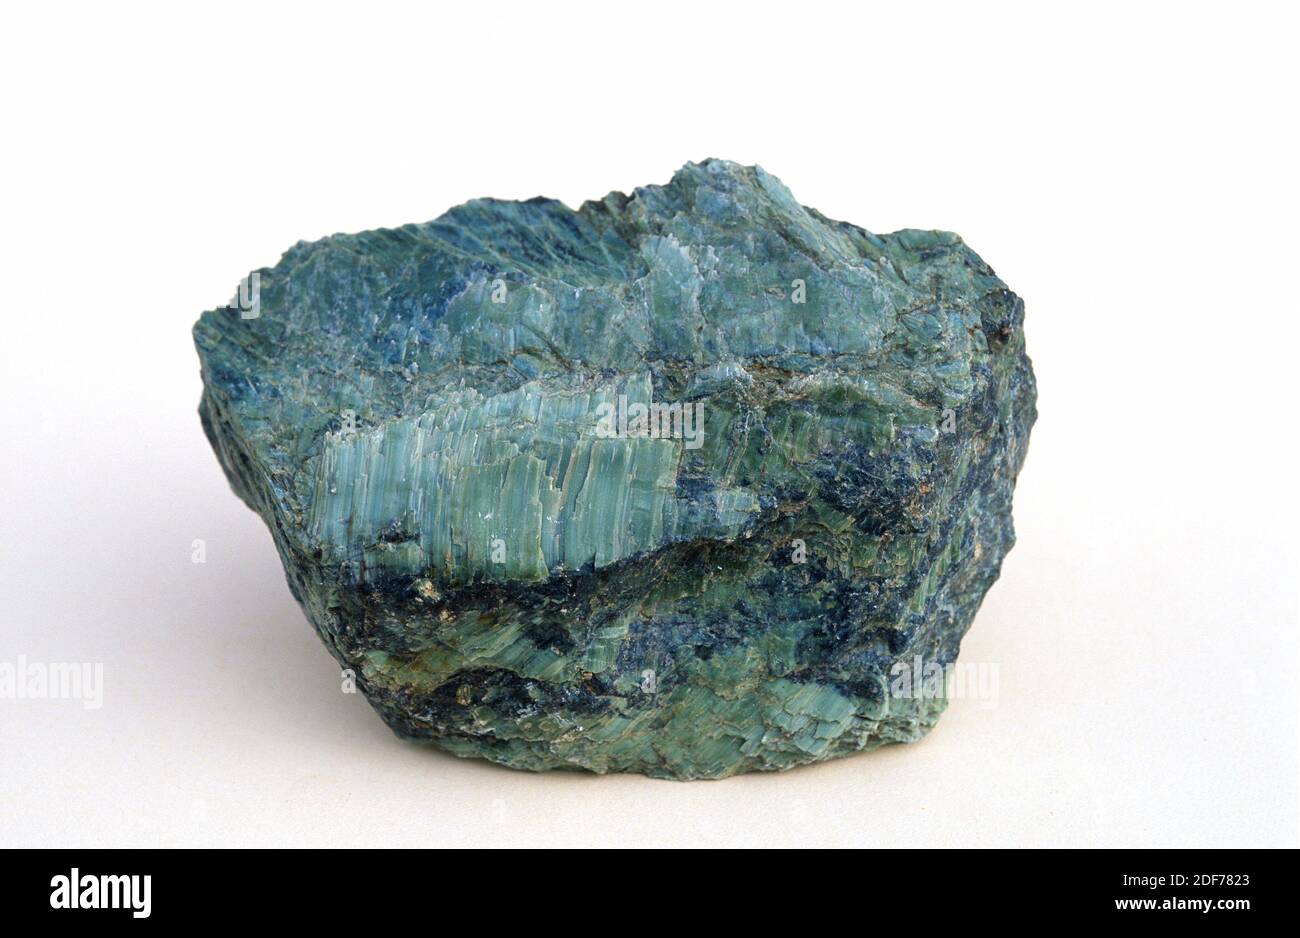 Serpentine Minerals: Characteristics, Uses, and Formation